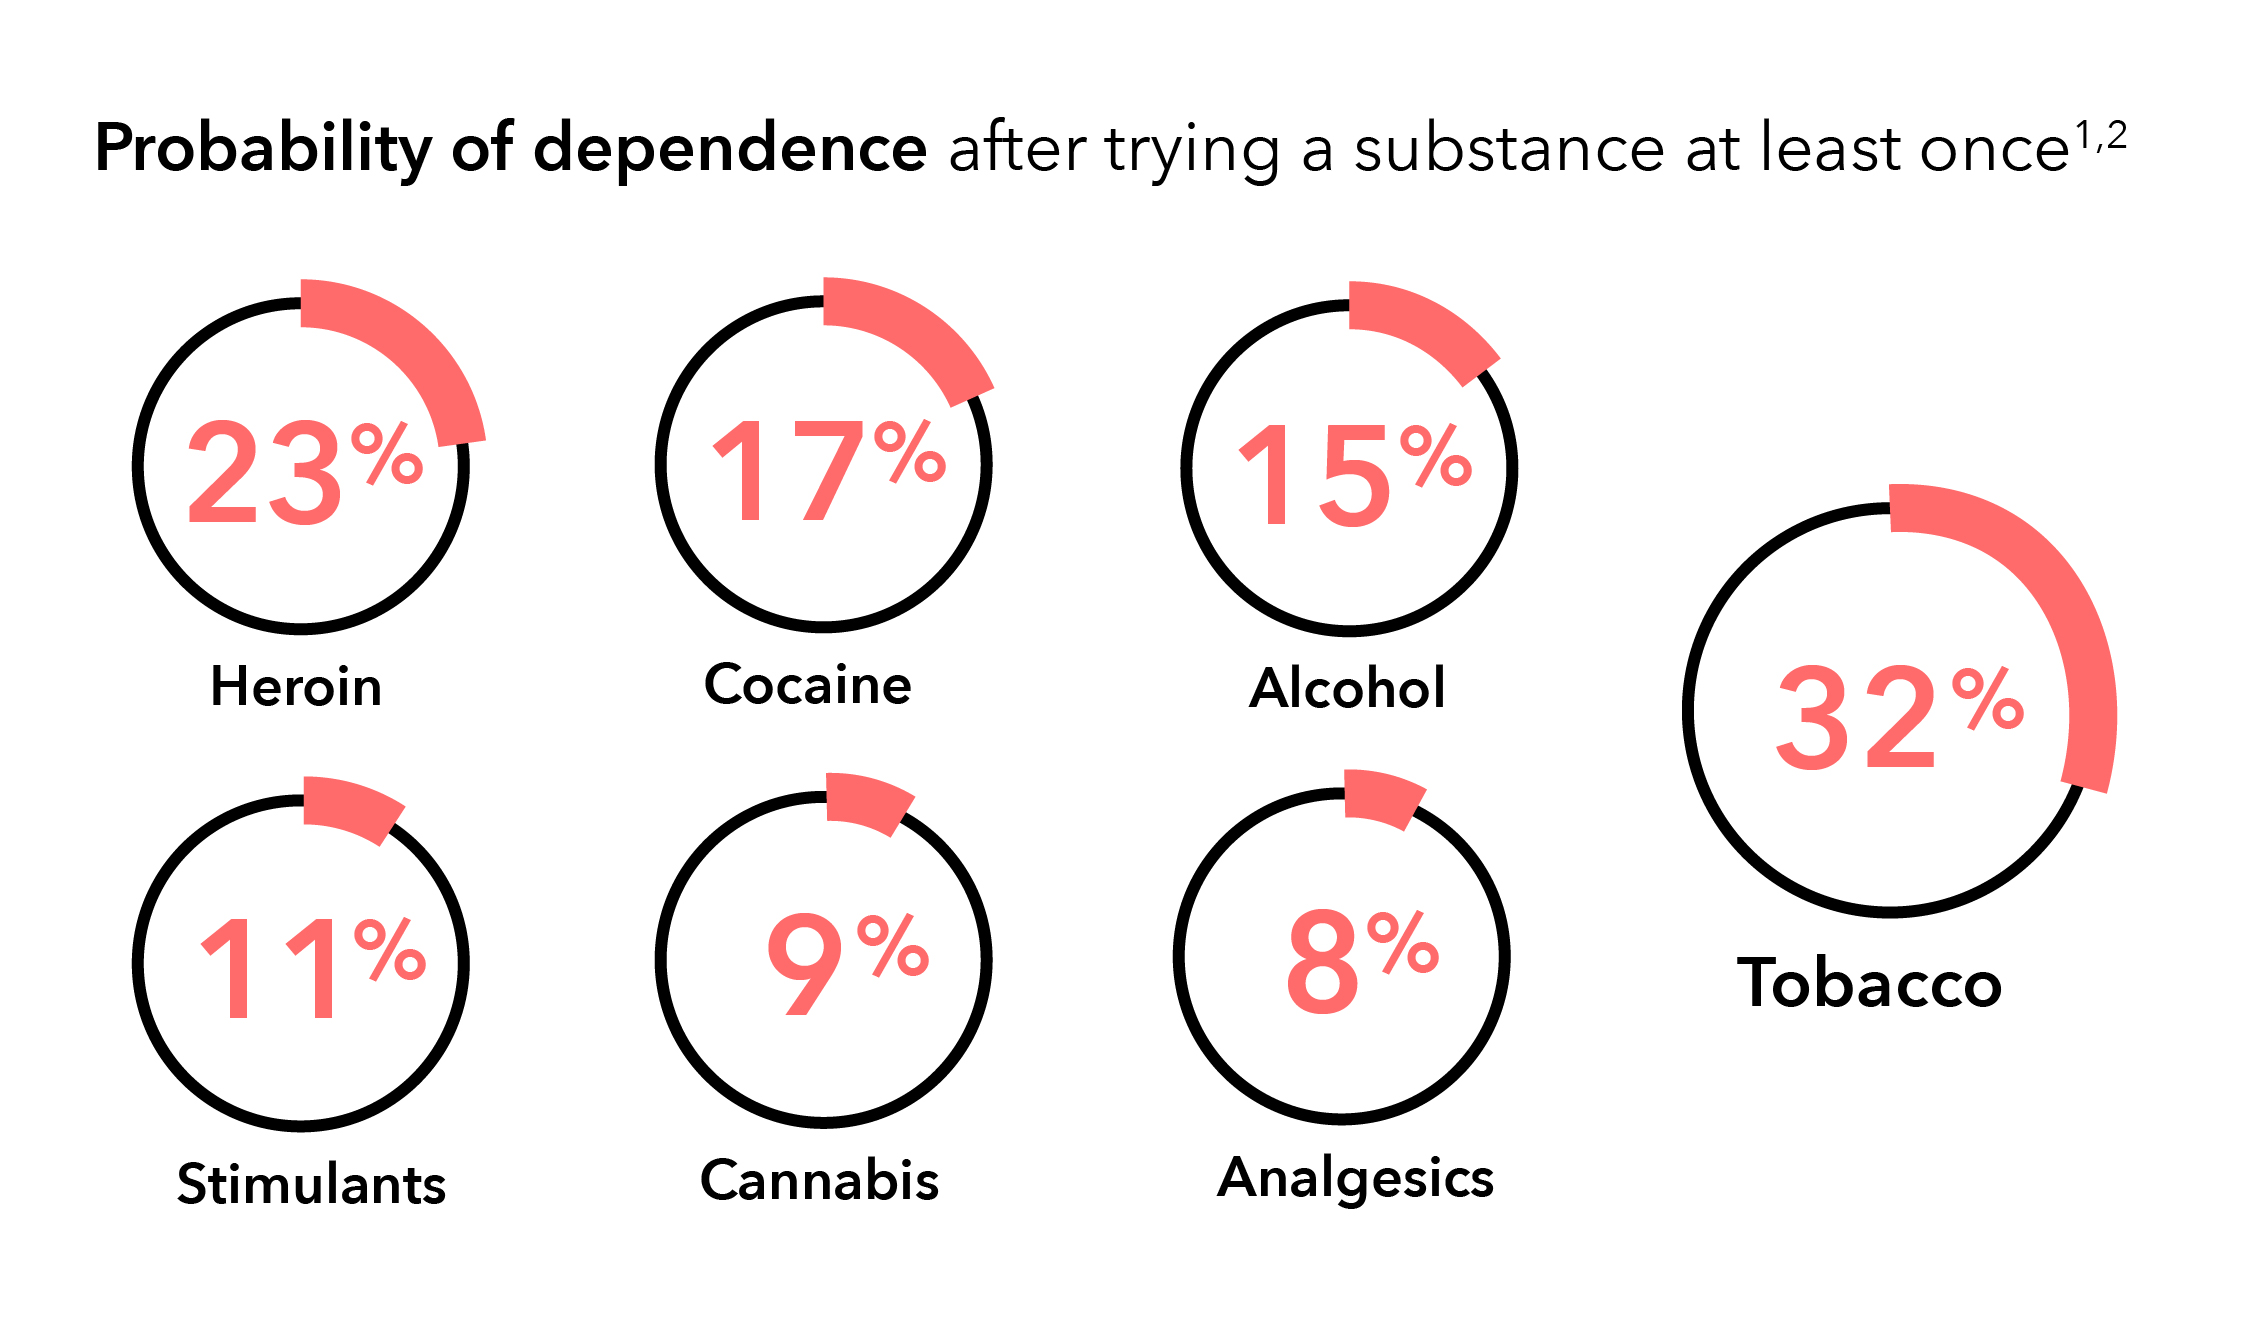 Image with percentages filled in. Percentages are Heroin 23, Cocaine 17, Alcohol 15, Stimulants 11, Cannabis 9, Analgesics 8, and Tobacco 32.